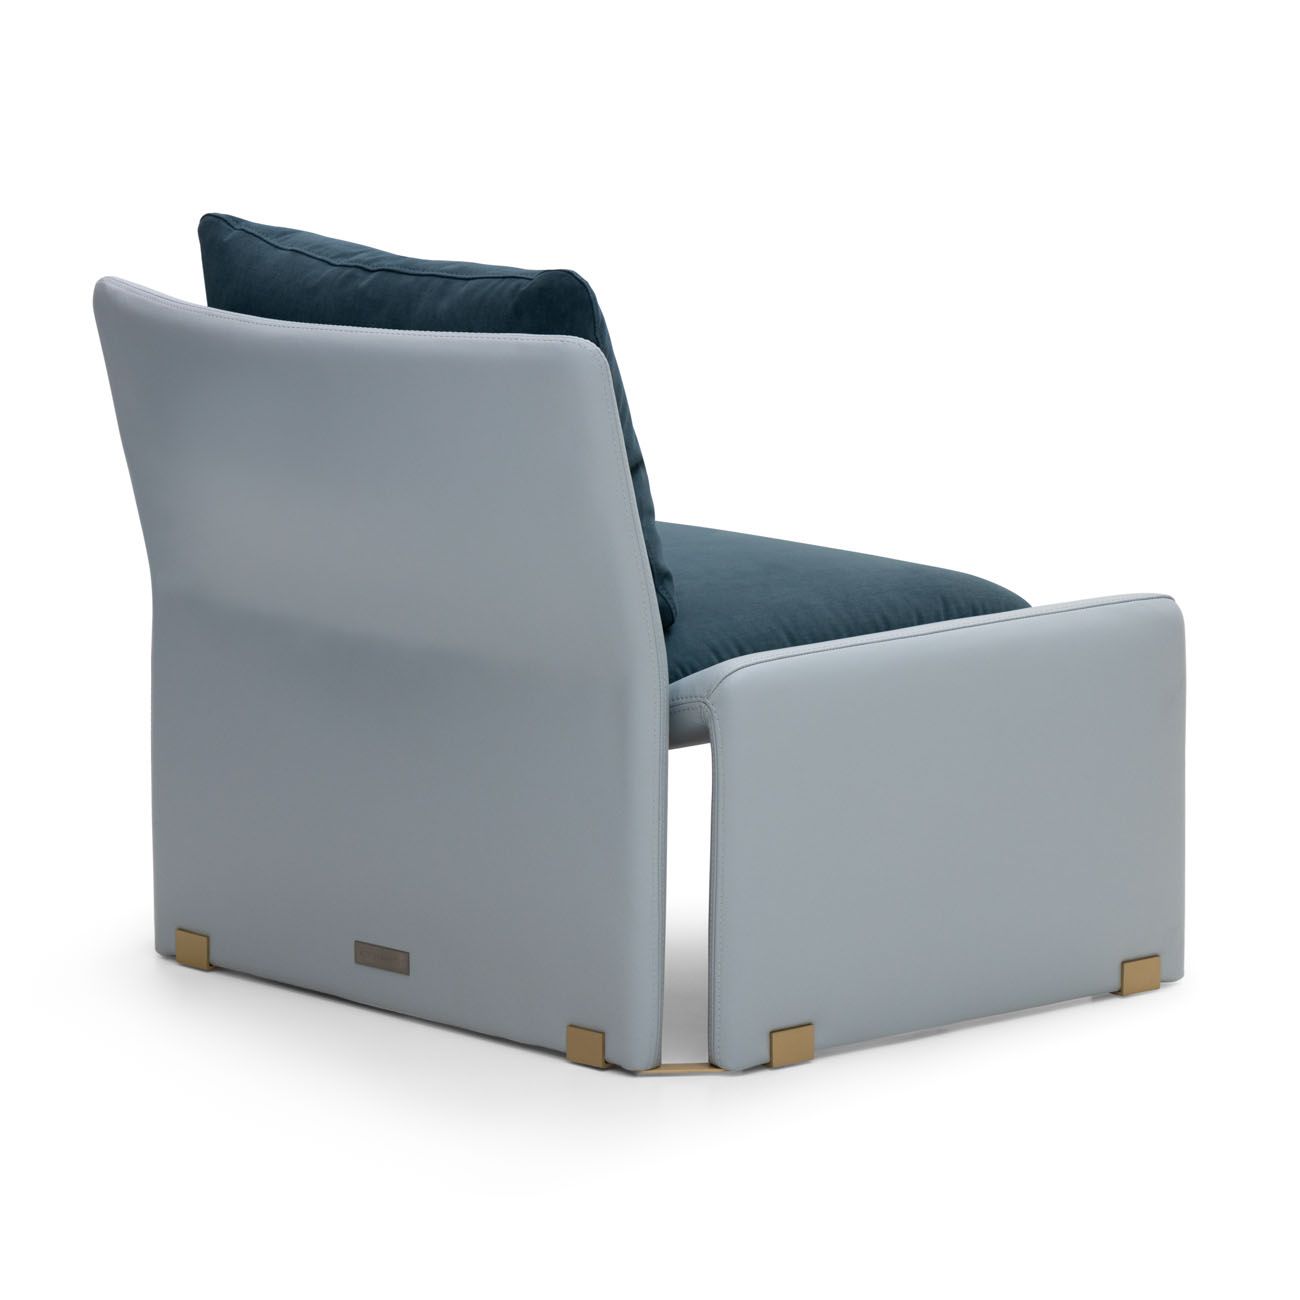 ASTON MARTIN HOME | V263 Fabric and Leather Armchair - $15,269.00